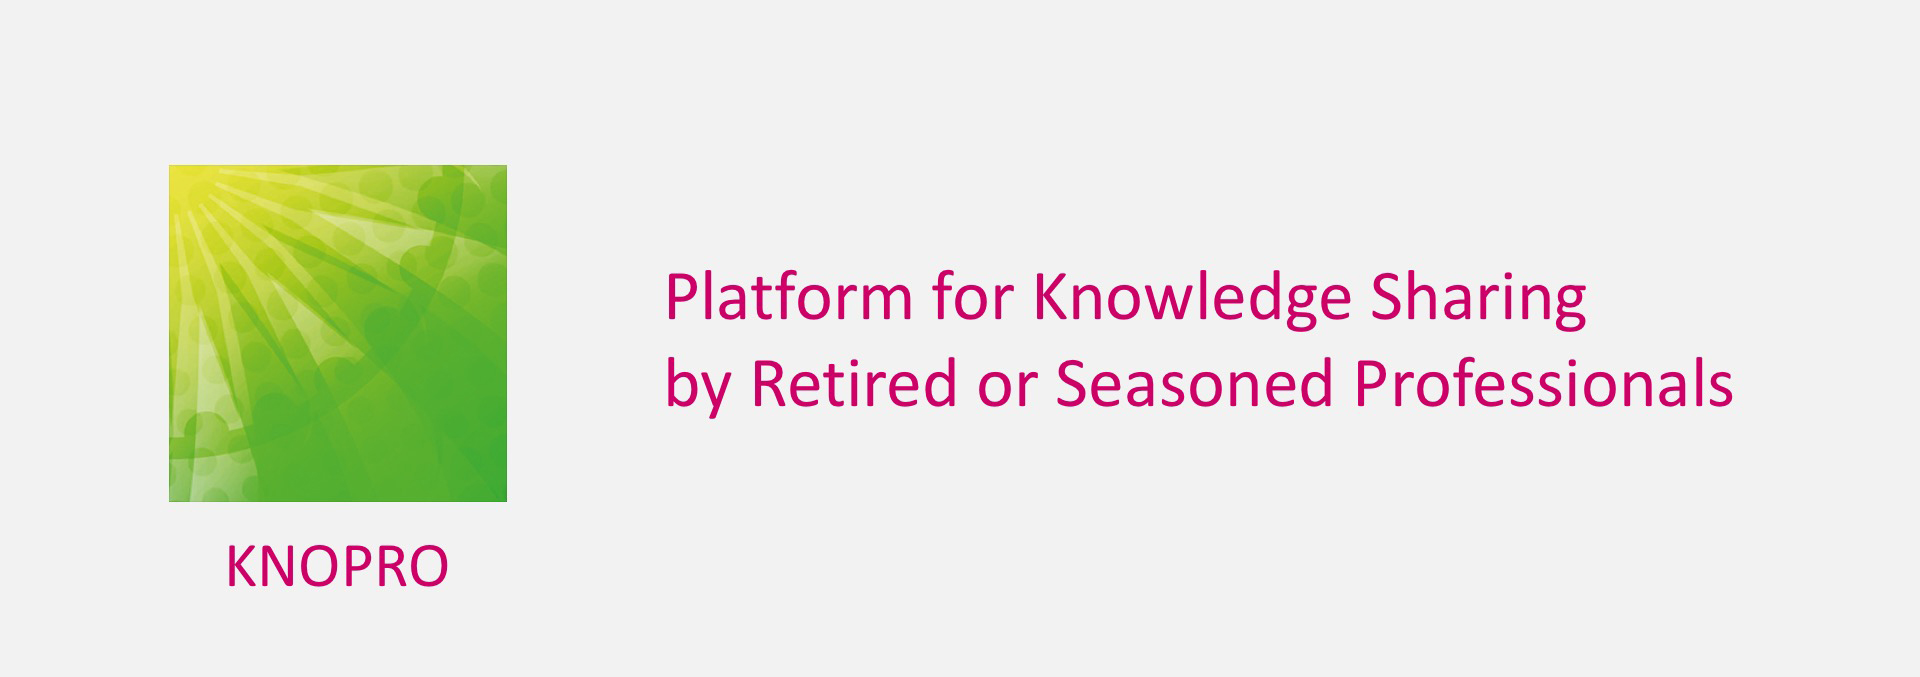 Platform for Knowledge Sharing by Retired or Seasoned Professionals